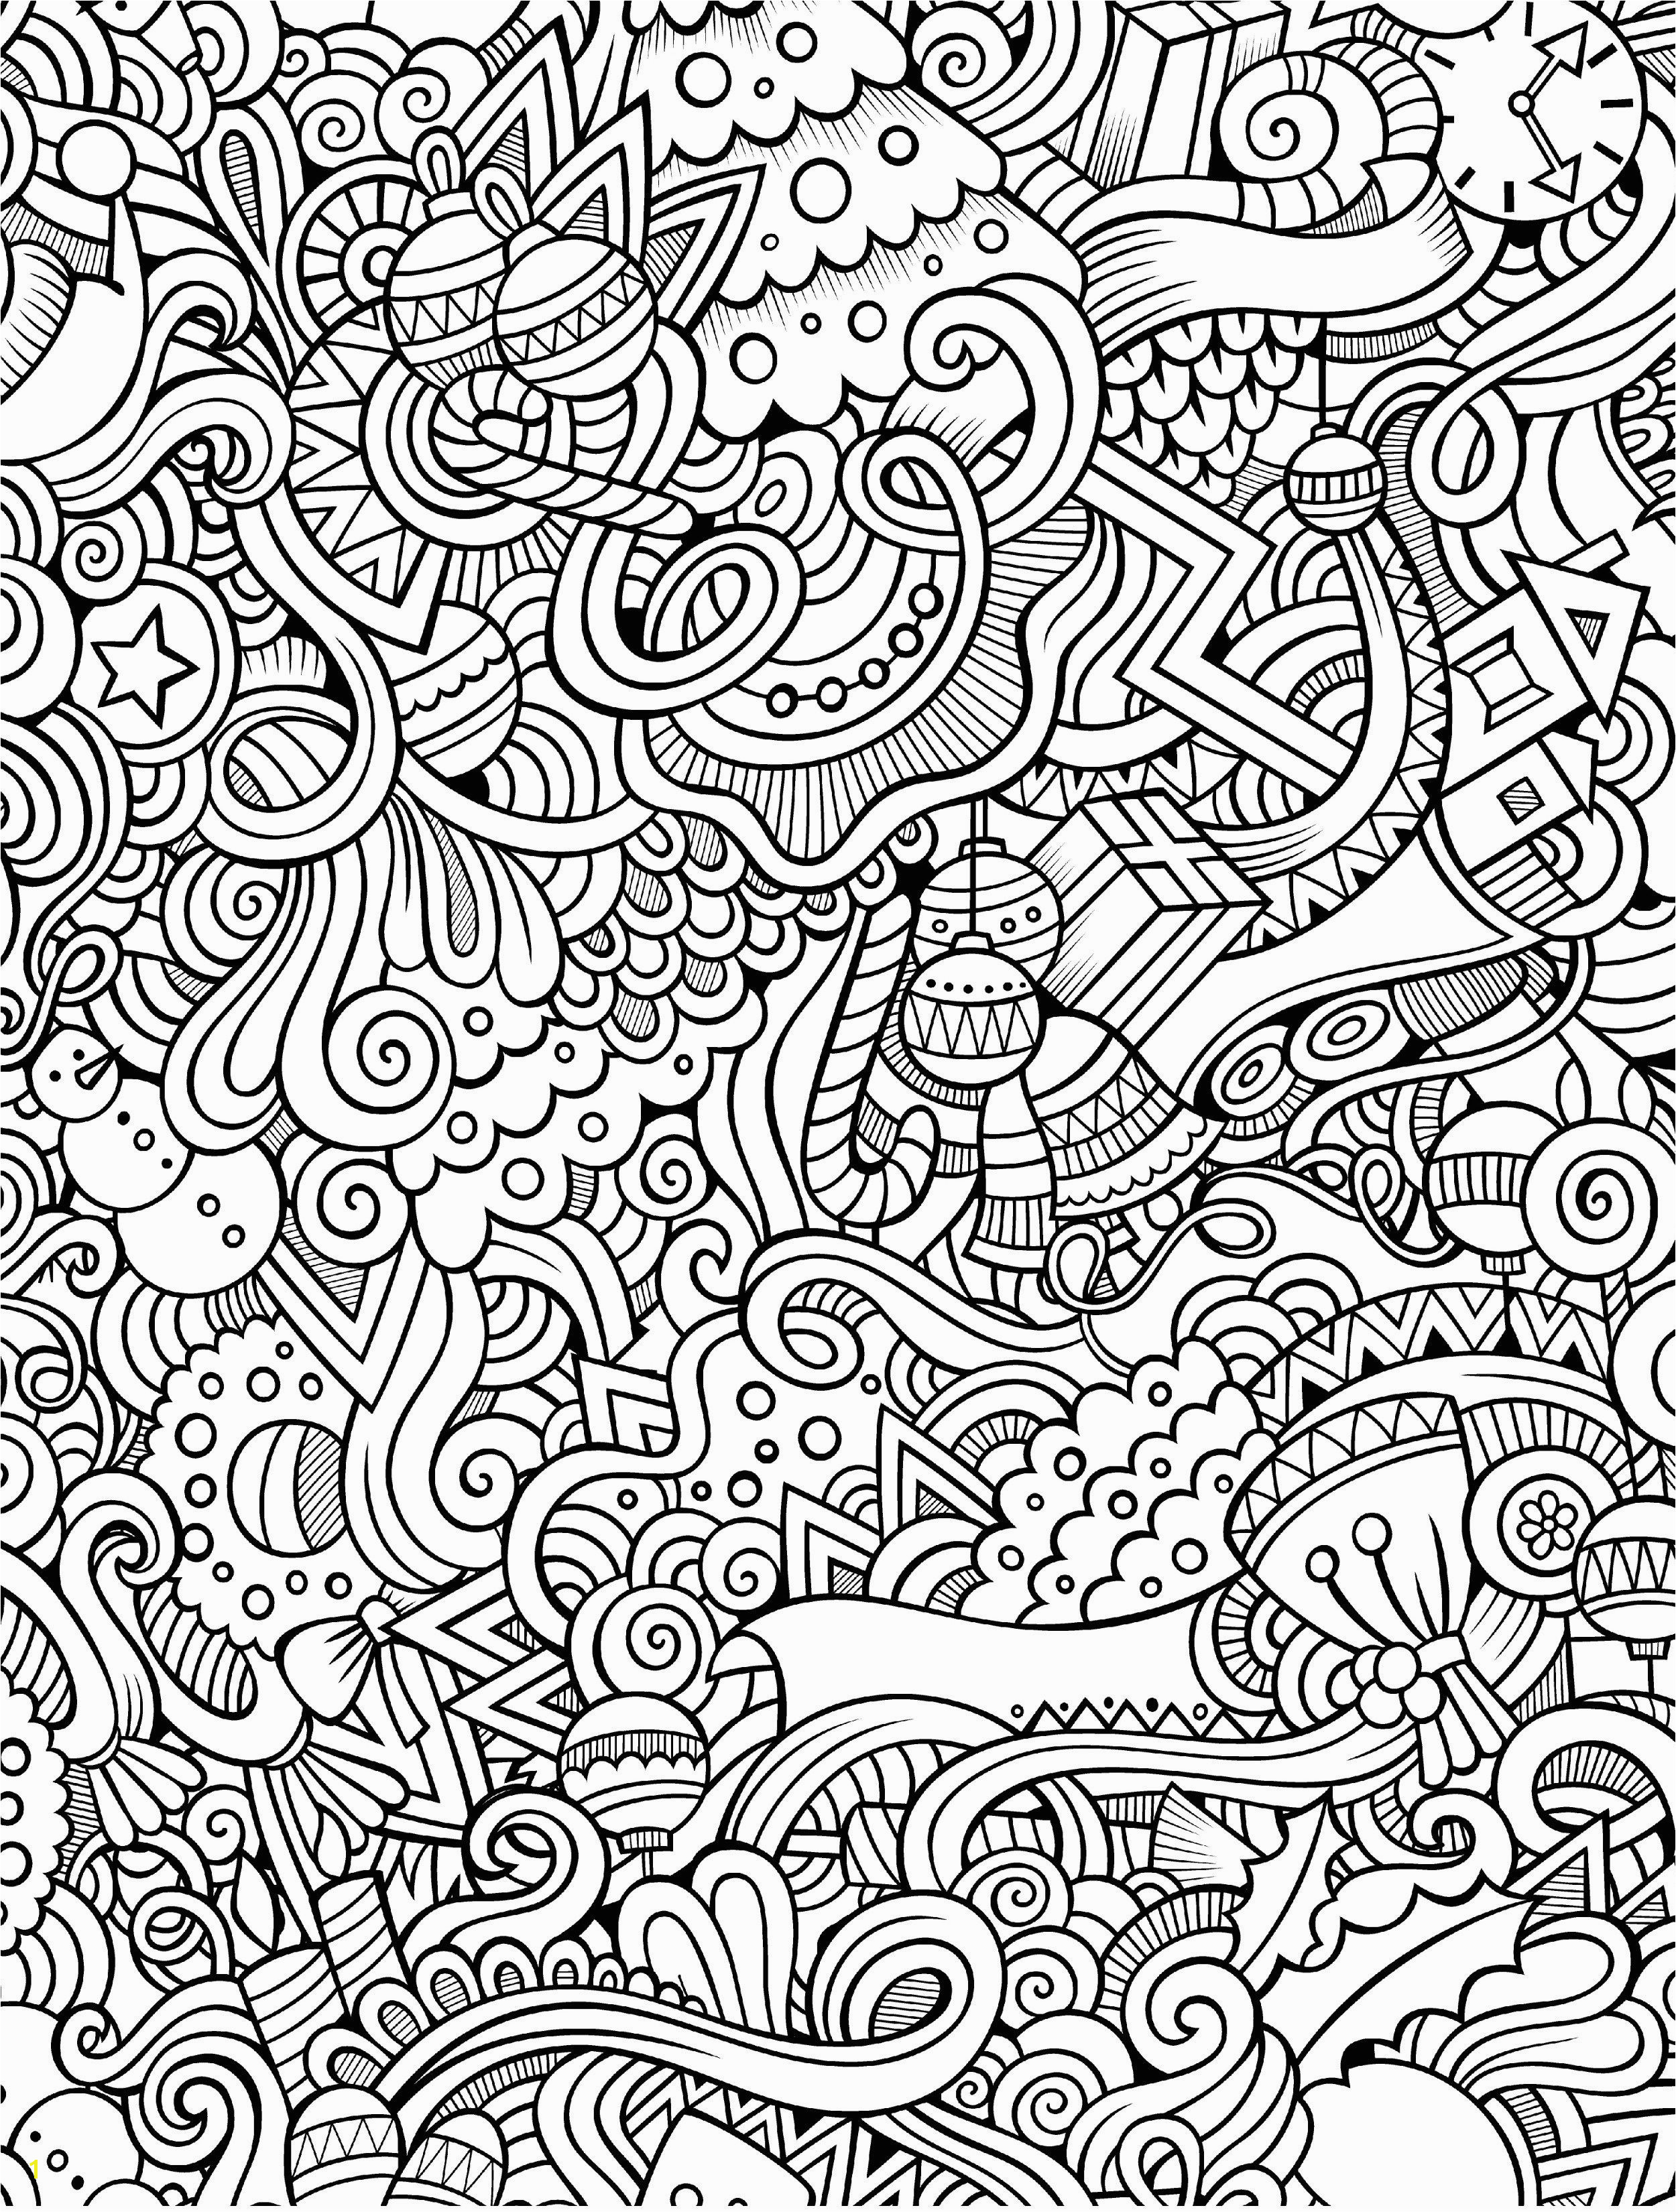 10 Free Printable Holiday Adult Coloring Pages